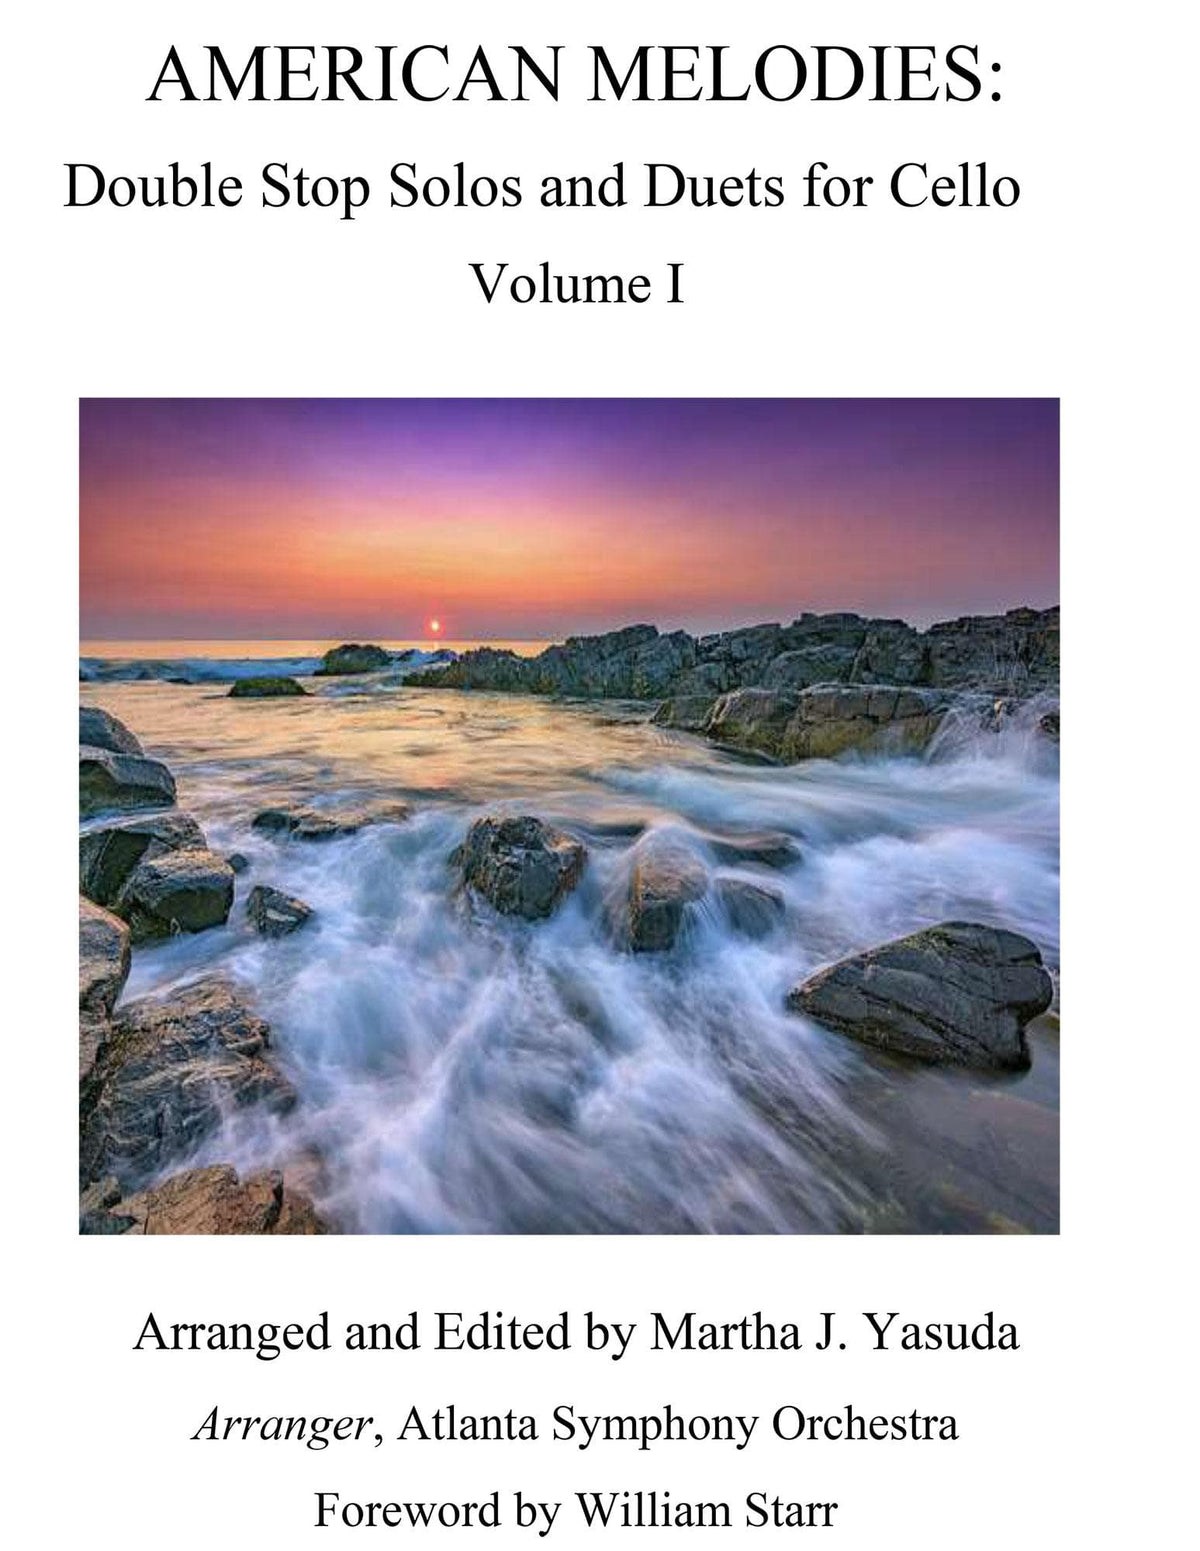 Yasuda, Martha - American Melodies: Double Stop Solos and Duets for Cello, Volume I - Digital Download